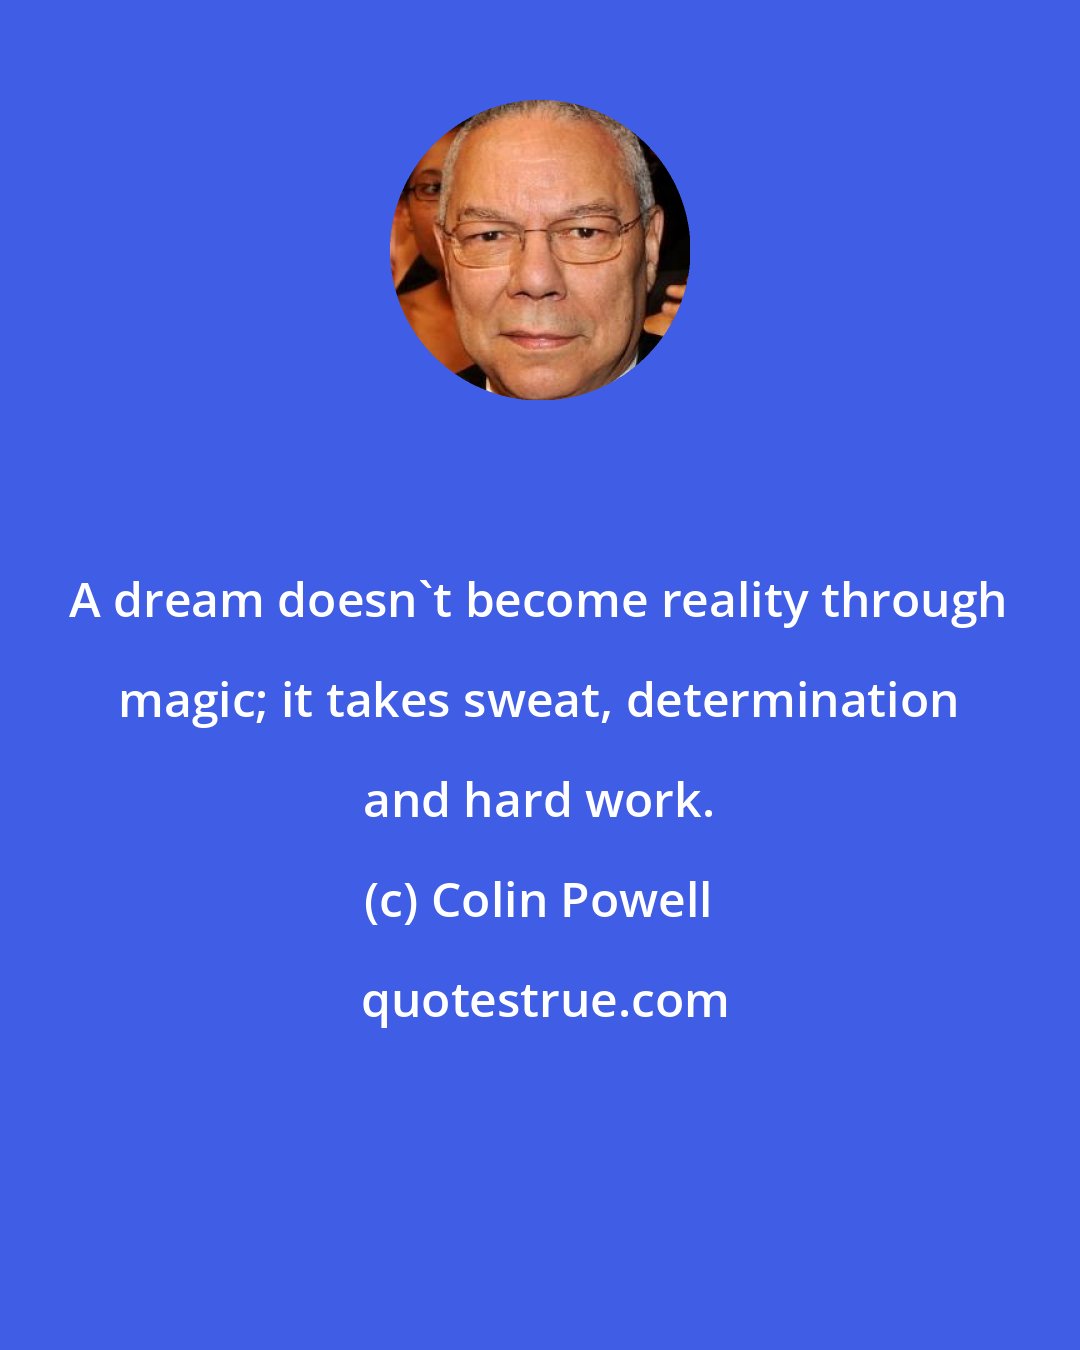 Colin Powell: A dream doesn't become reality through magic; it takes sweat, determination and hard work.